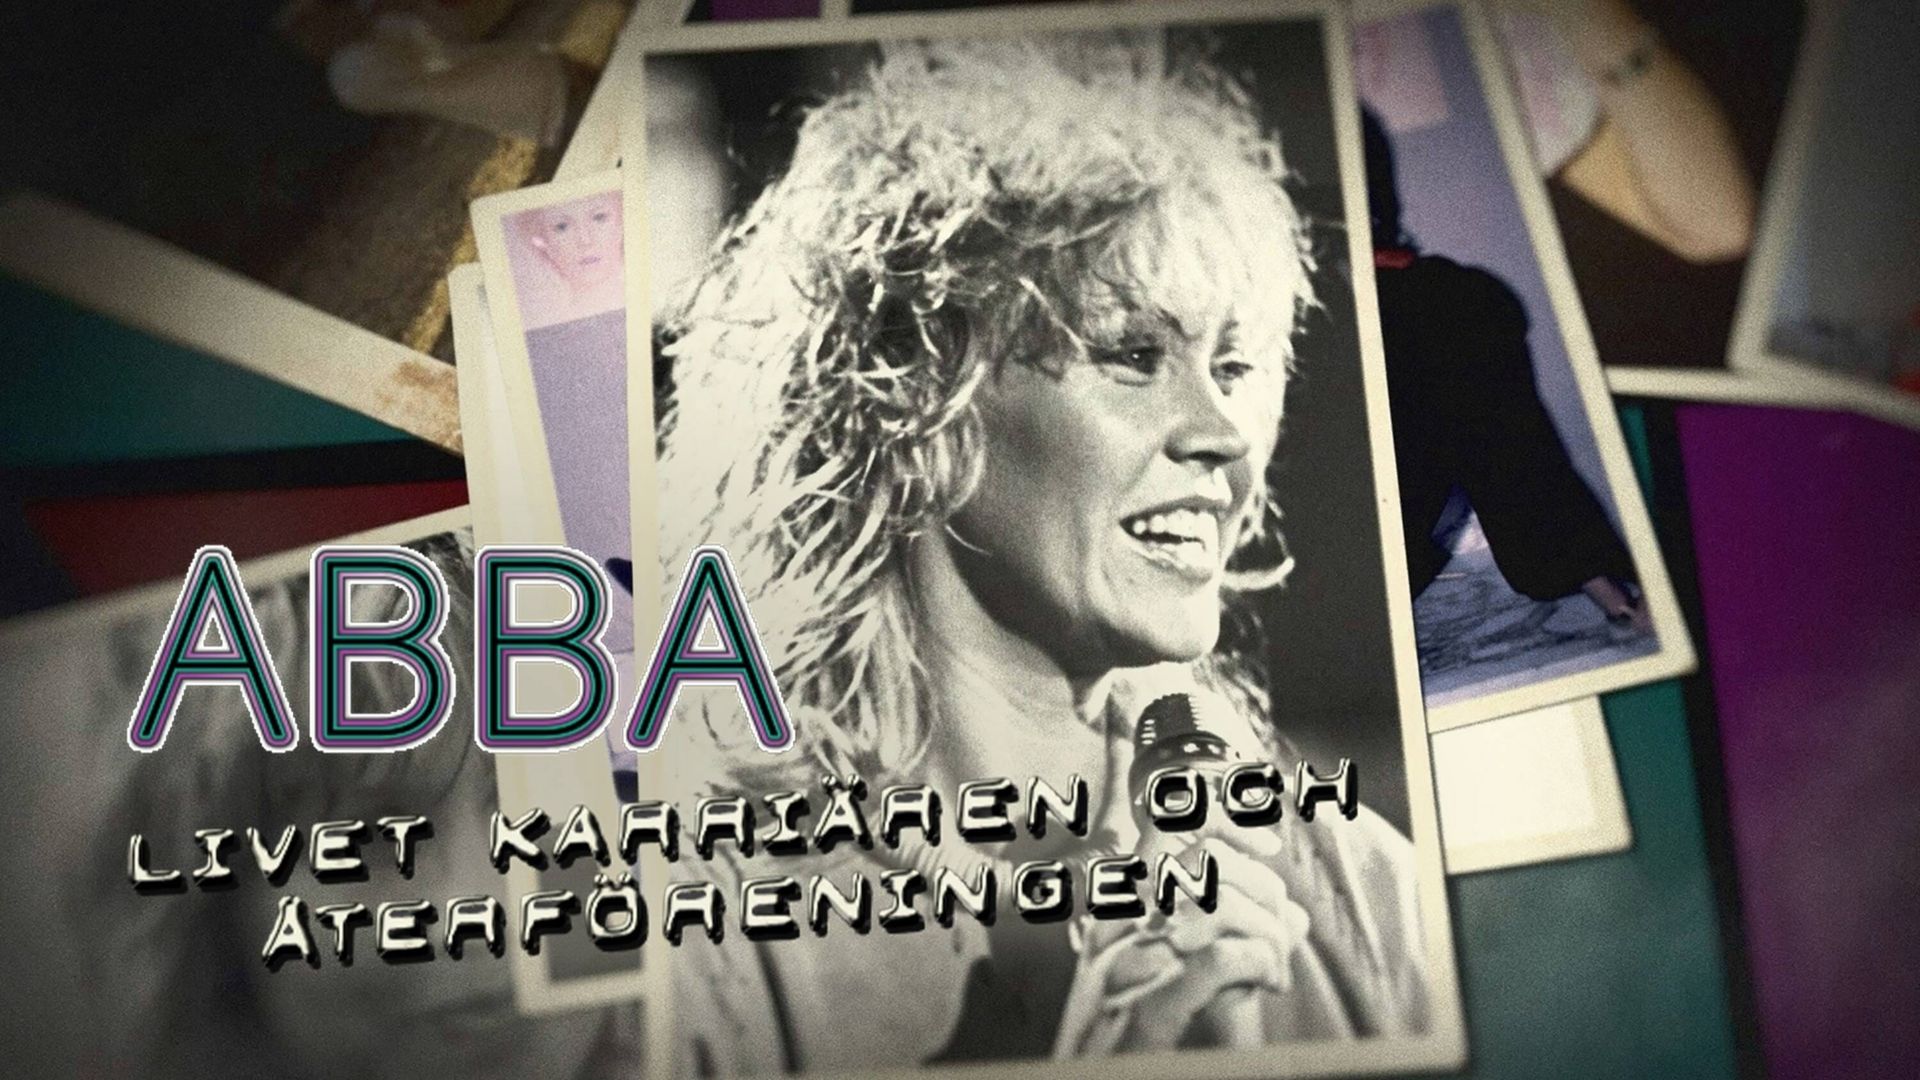 Abba: The Missing 40 Years background